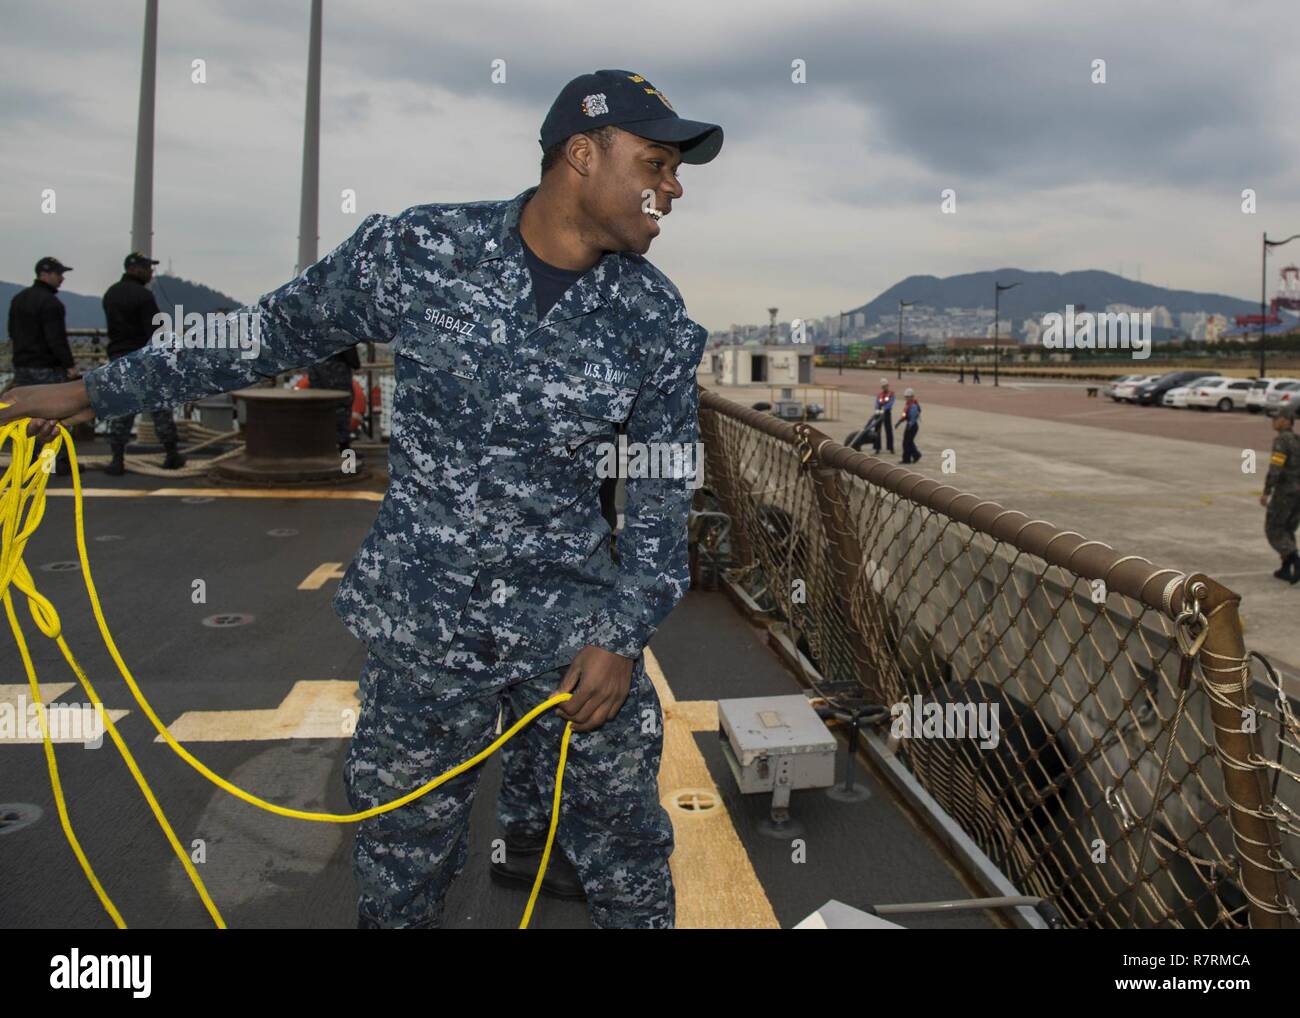 BUSAN, Republic of Korea (April 1, 2017) Electronics Technician 3rd Class Musa Shabazz, from San Francisco, California, tosses a mooring line from the flight deck of Arleigh Burke-class guided-missile destroyer USS Barry (DDG 52) as the ship arrives in Busan, Republic of Korea for a scheduled port visit.  Barry is on patrol in the U.S. 7th Fleet area of operations in support of security and stability in the Indo-Asia-Pacific region. Stock Photo